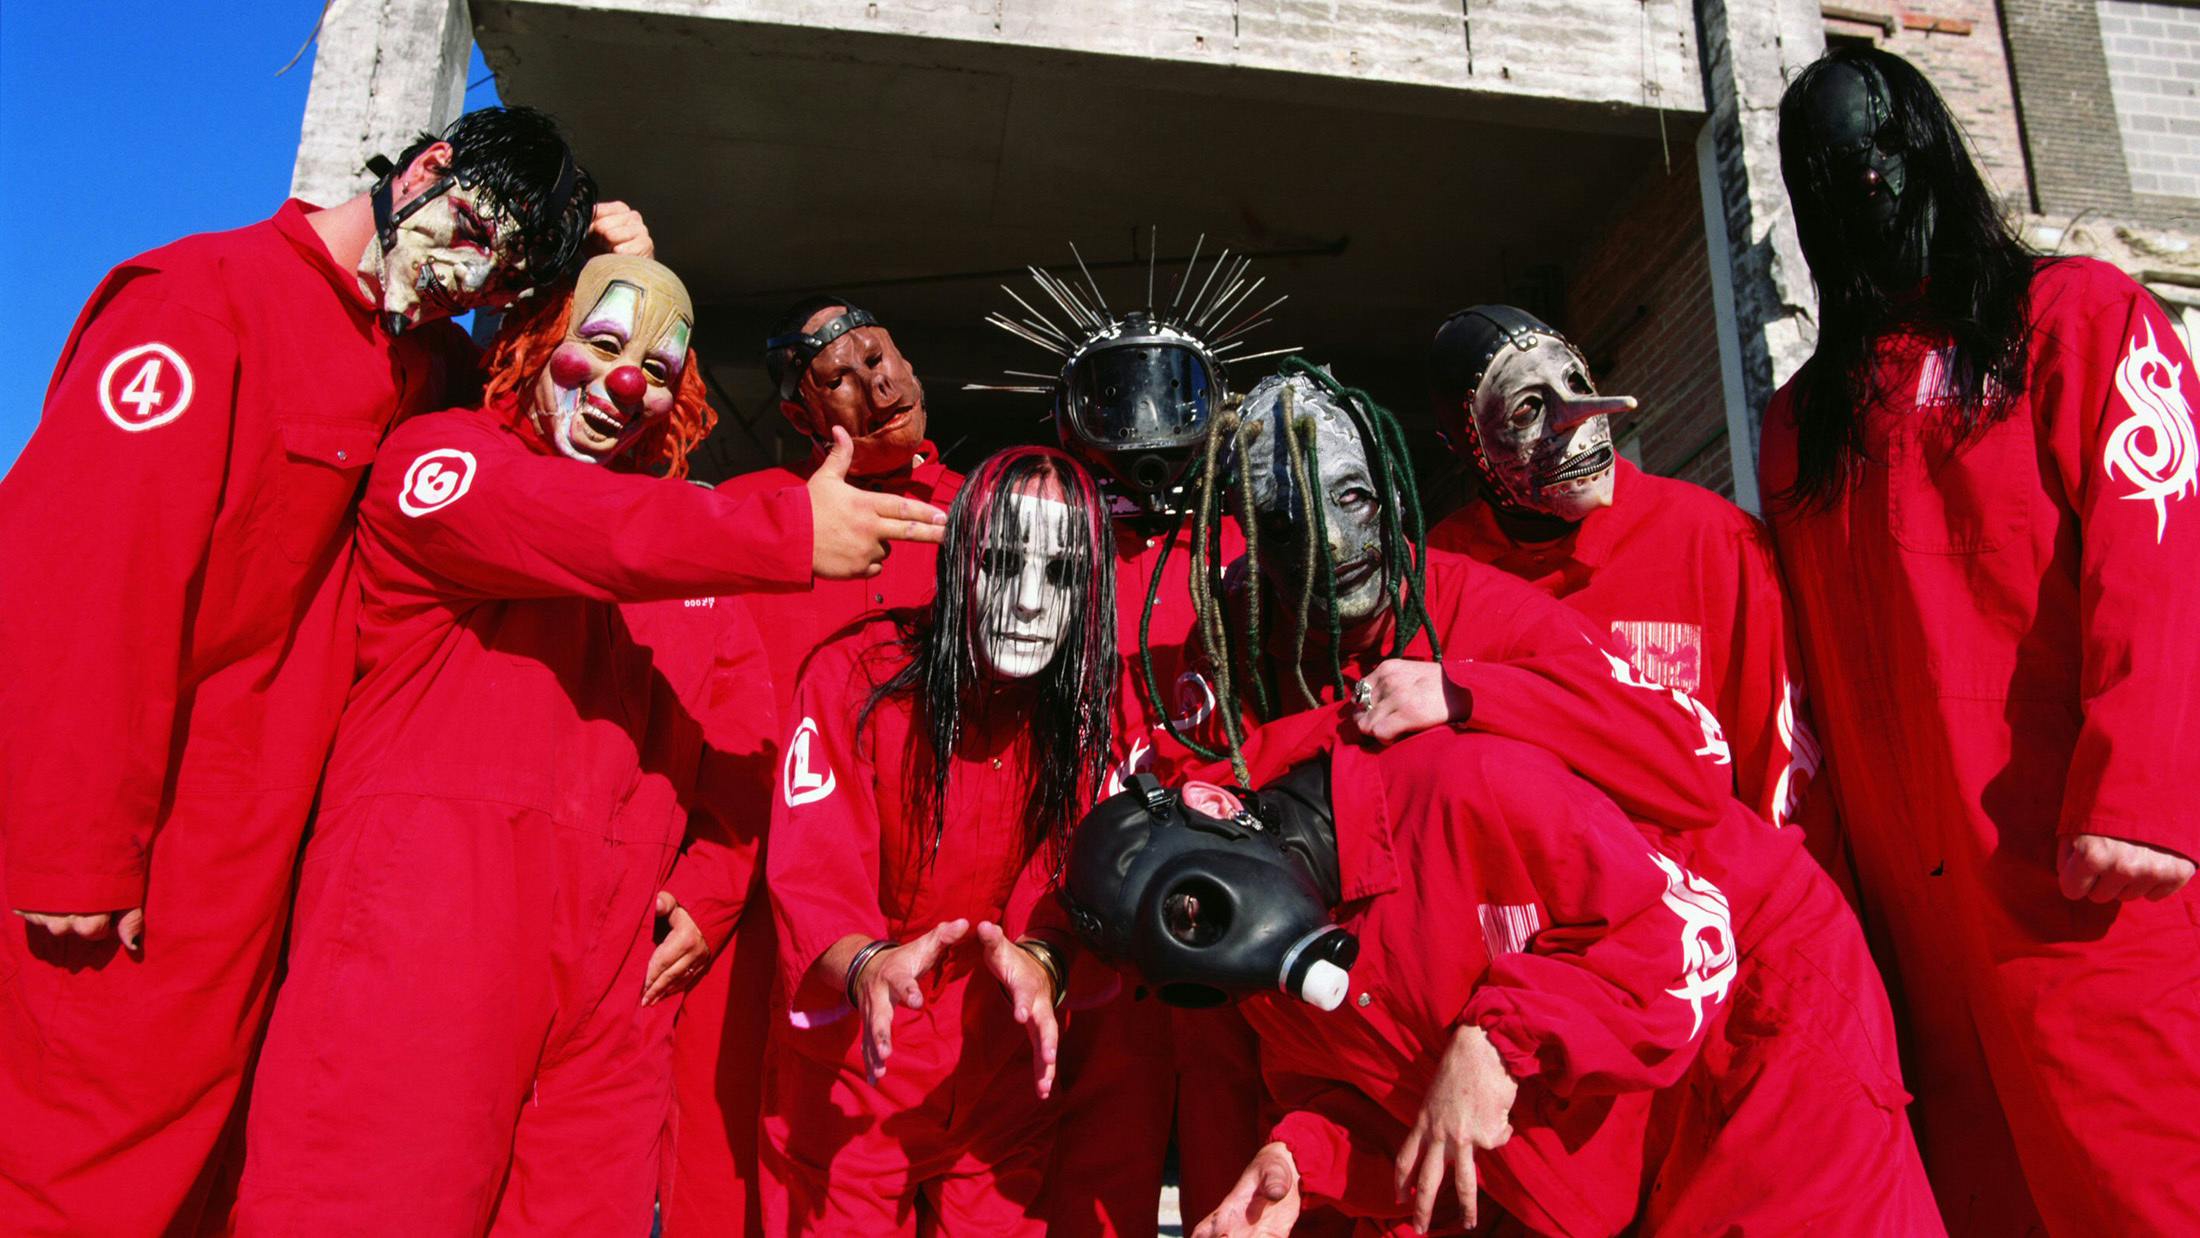 You Can Now Watch Slipknot's 1999 Documentary Welcome To Our Neighborhood On YouTube